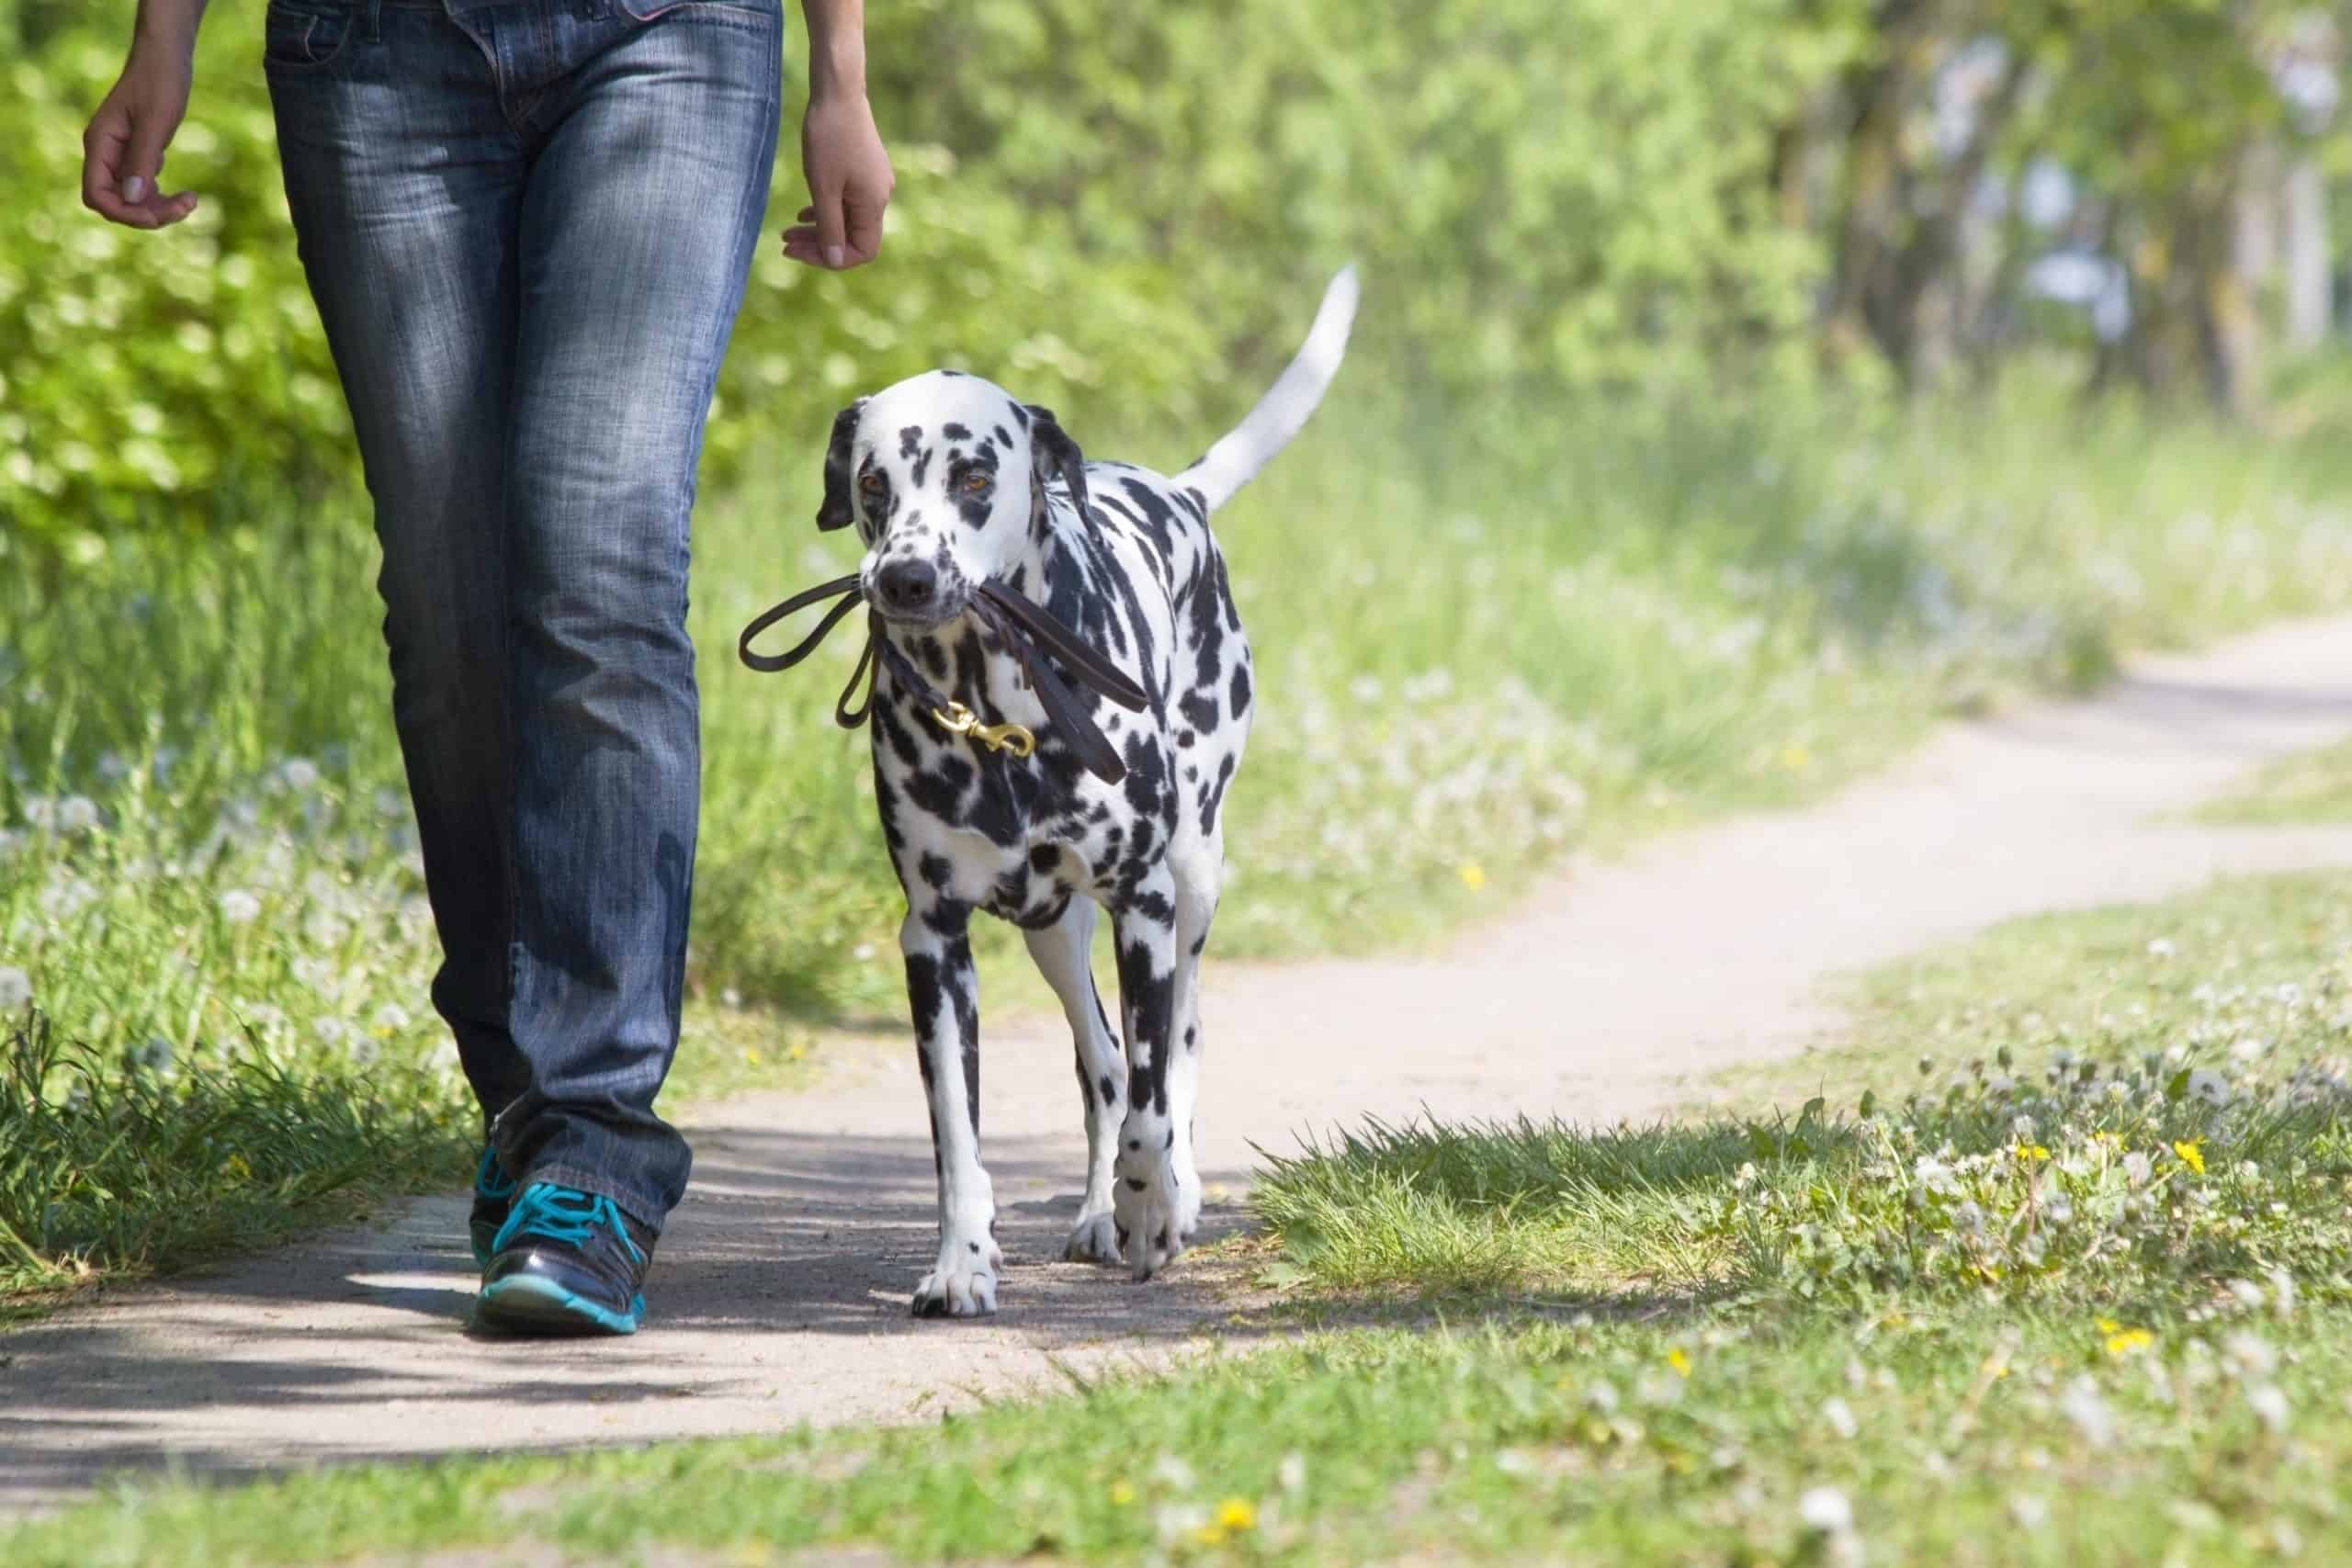 Man walks with Dalmatian. A Dalmatian is an ideal dog for someone who wants a companion for running, hiking, or even cycling.